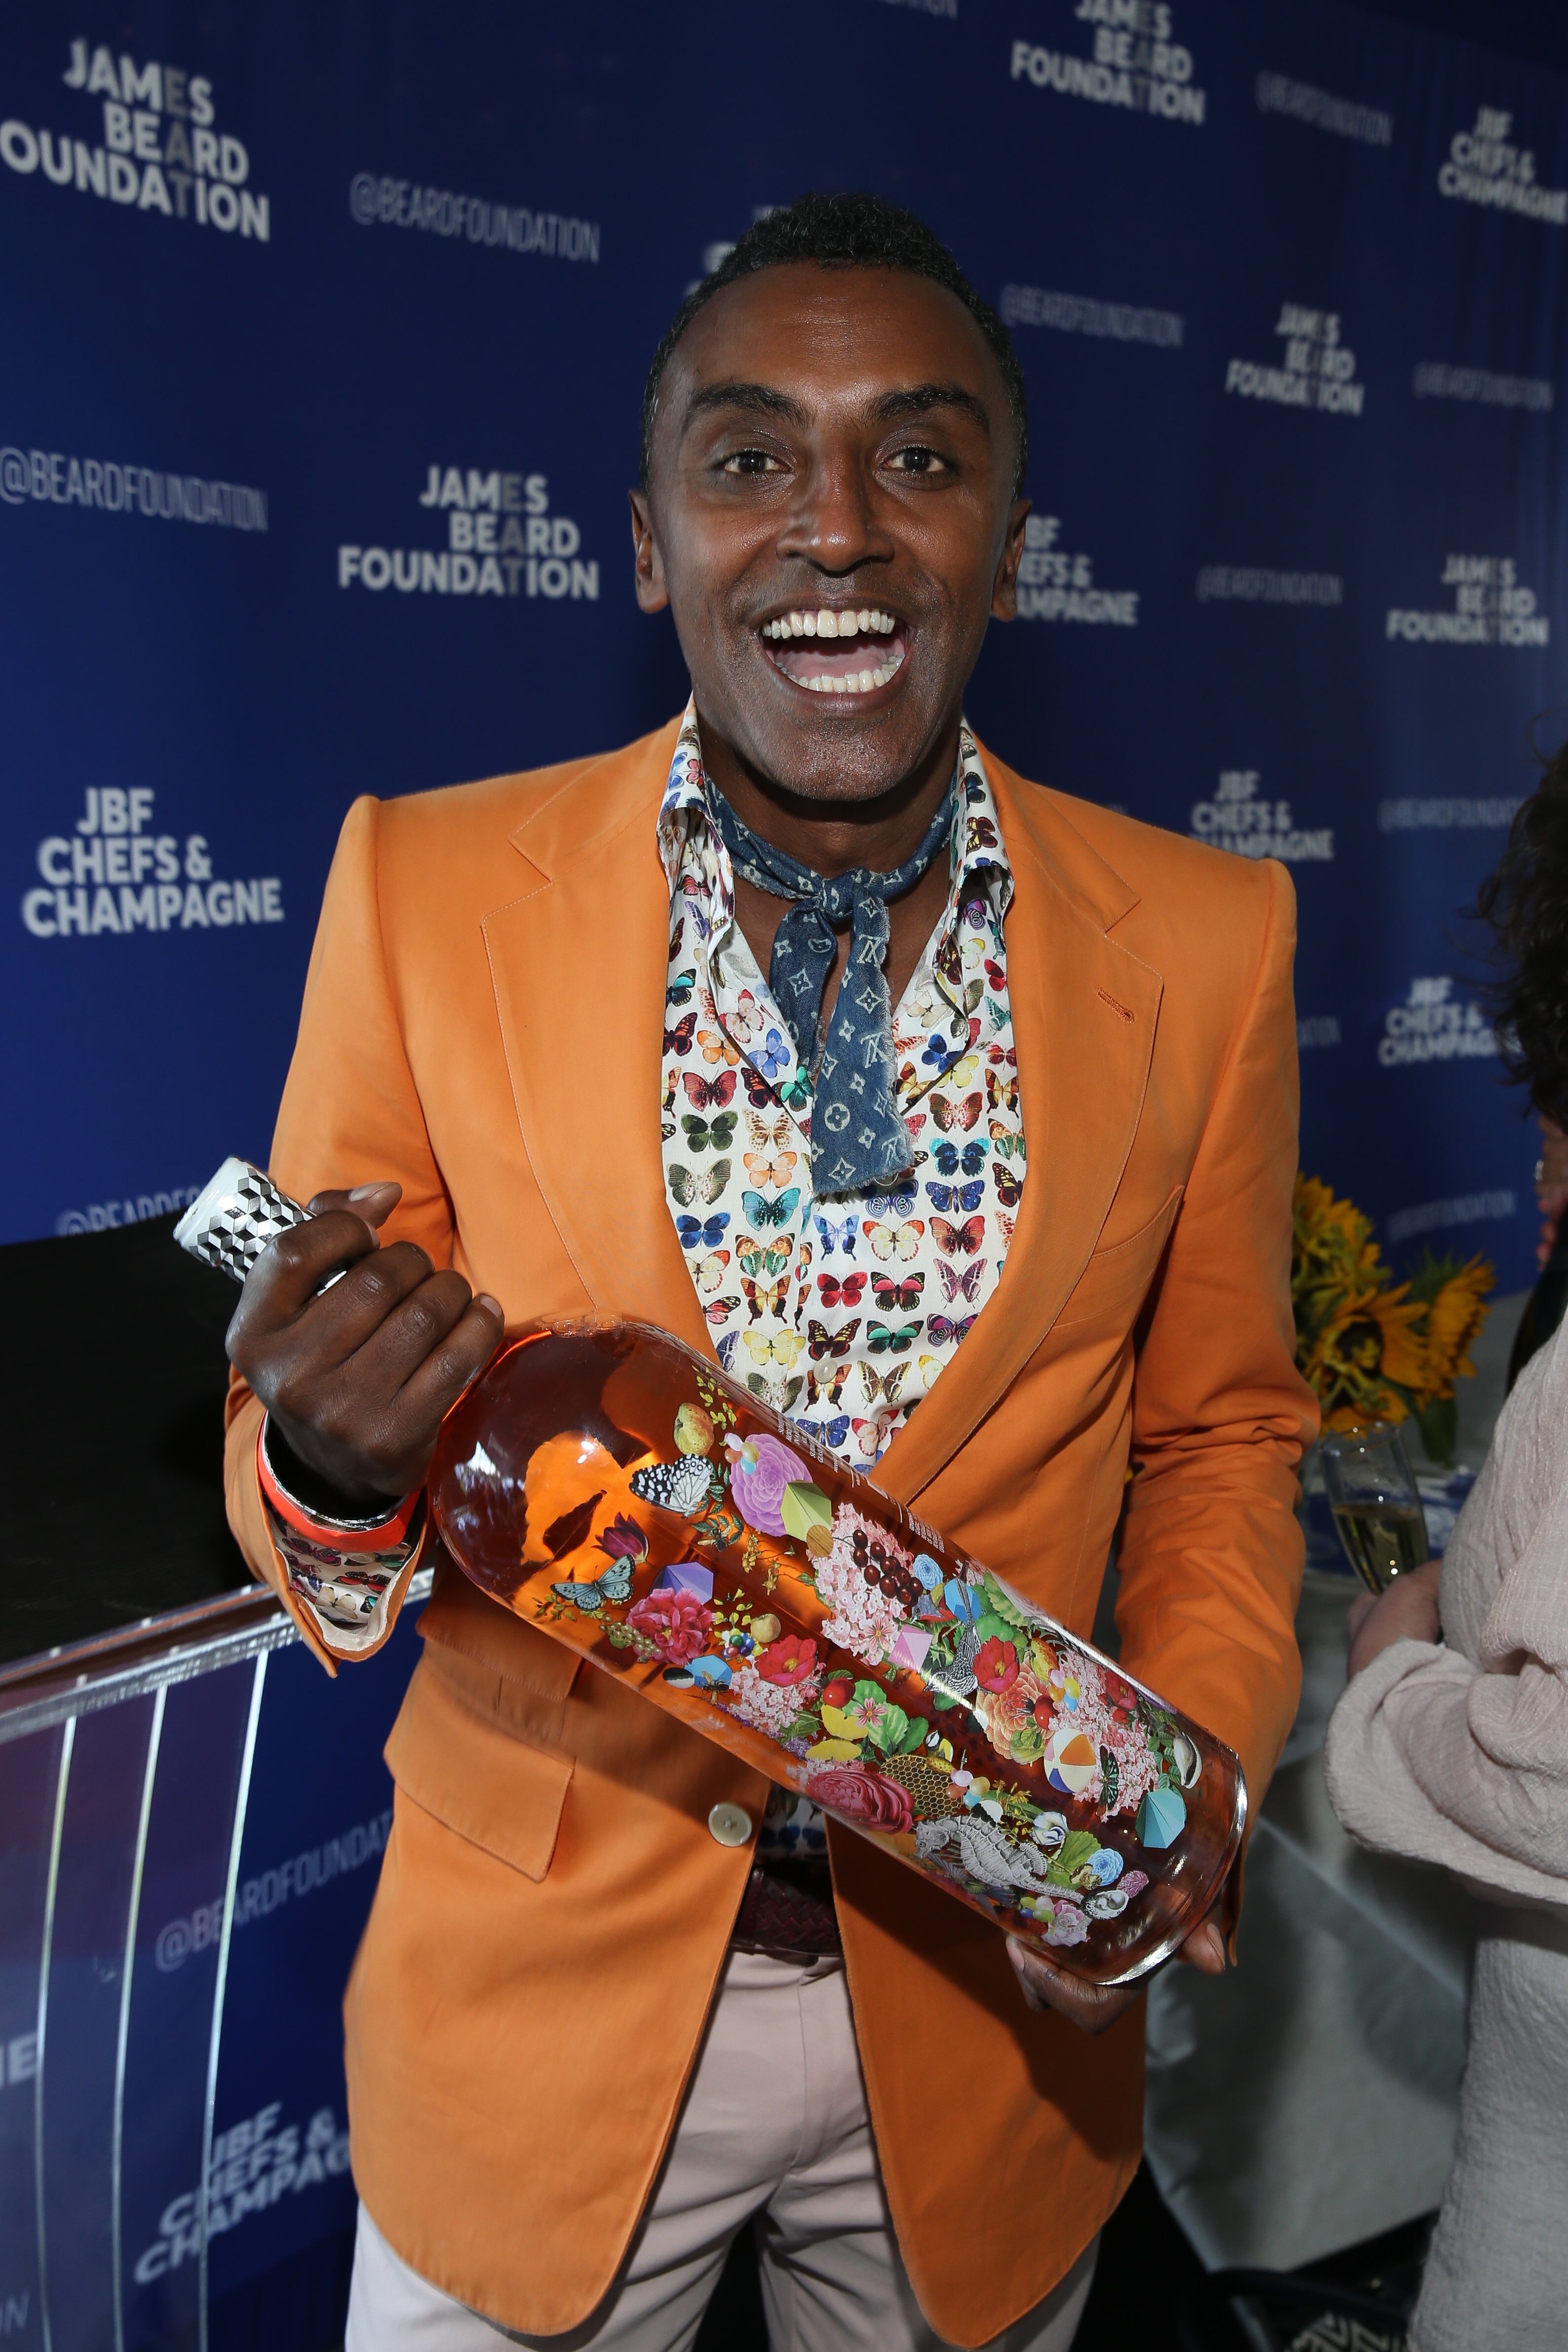 Honoree Marcus Samuelsson seen at the 2017 JBF Chefs and Champagne at Wolffer estate on Saturday, July 29, 2017 in Sagaponack, N.Y. (Photo by Mark Von Holden/Invision for James Beard Foundation/Invision)